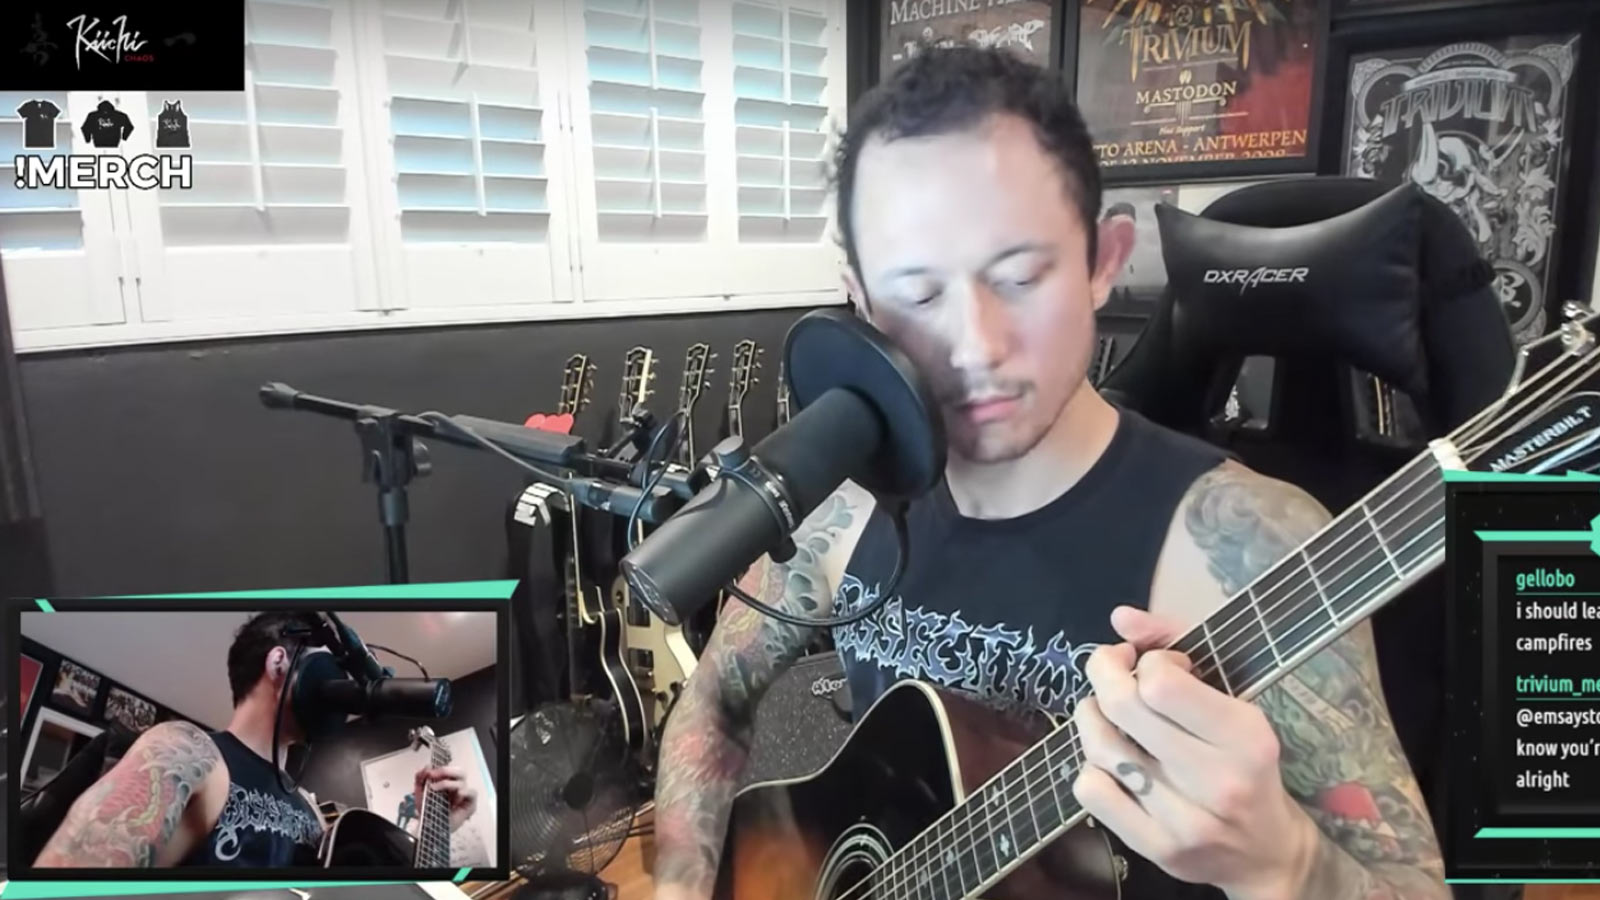 Watch Trivium's Matt Heafy Perform Touching Cannibal Corpse Acoustic Cover | Revolver